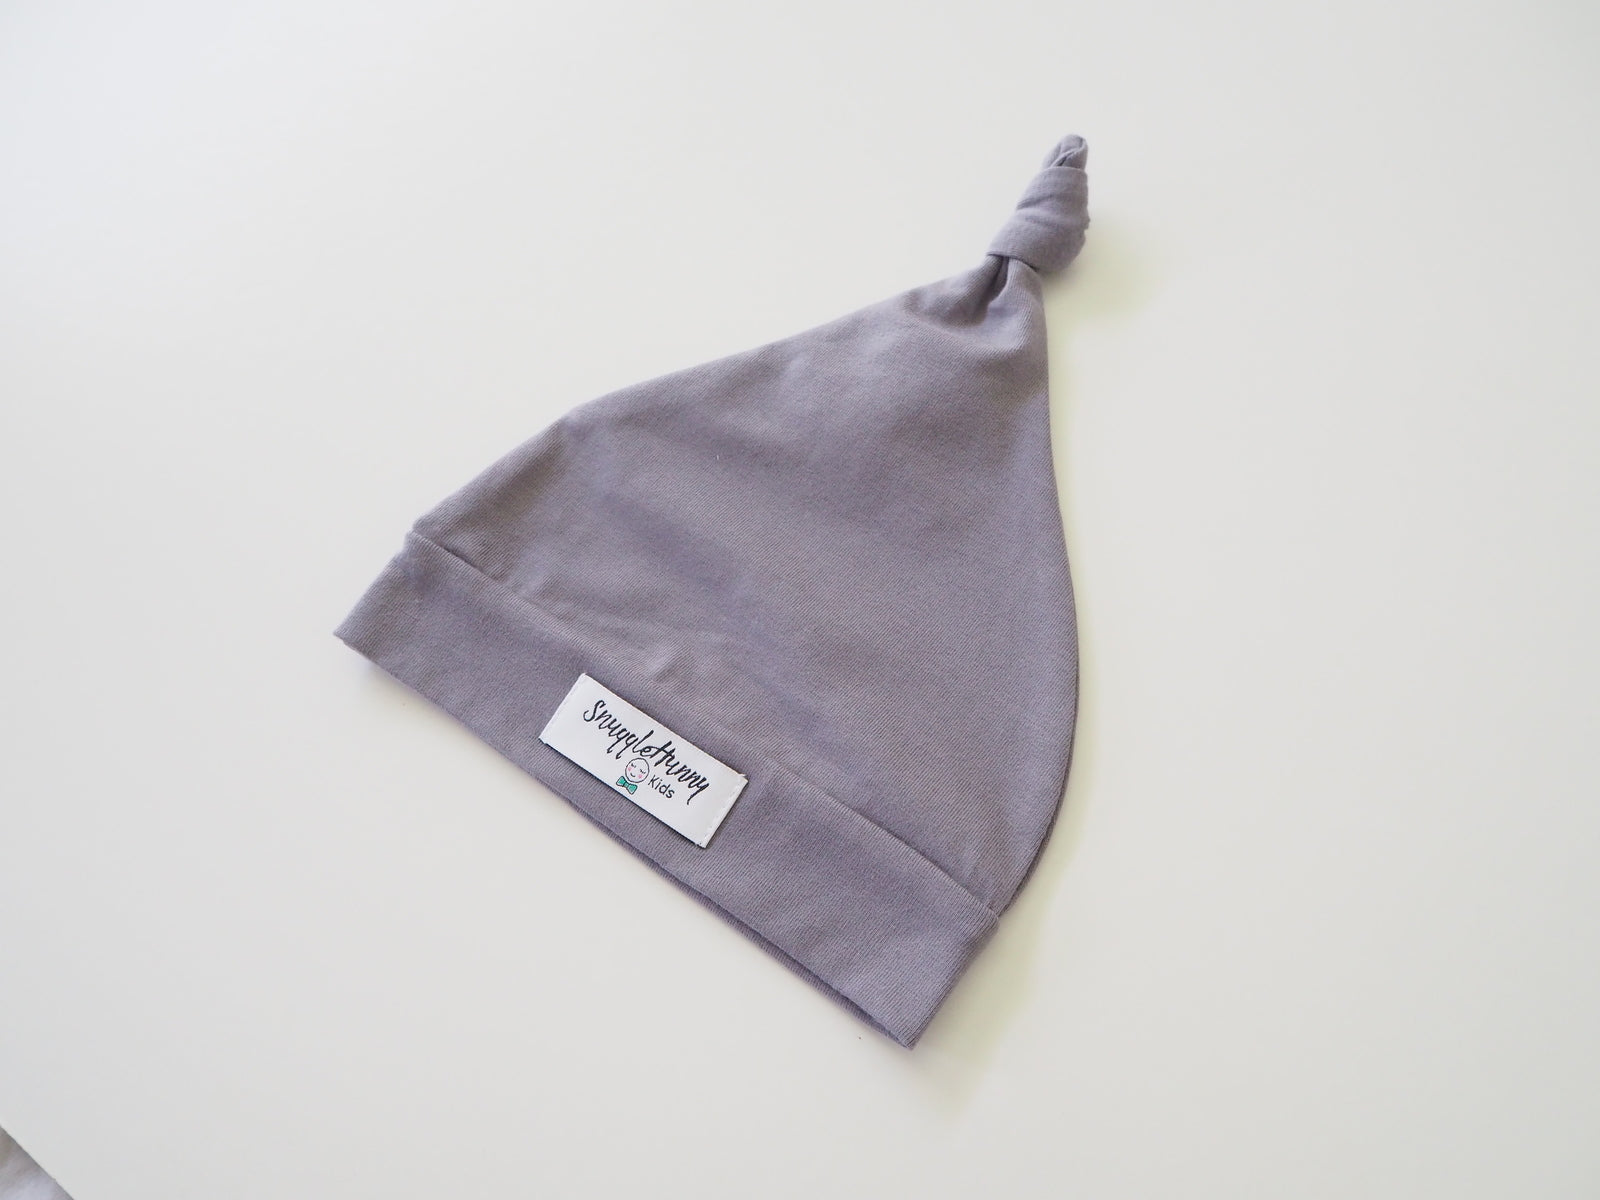 snuggle hunny kids grey knotted beanie /baby hat